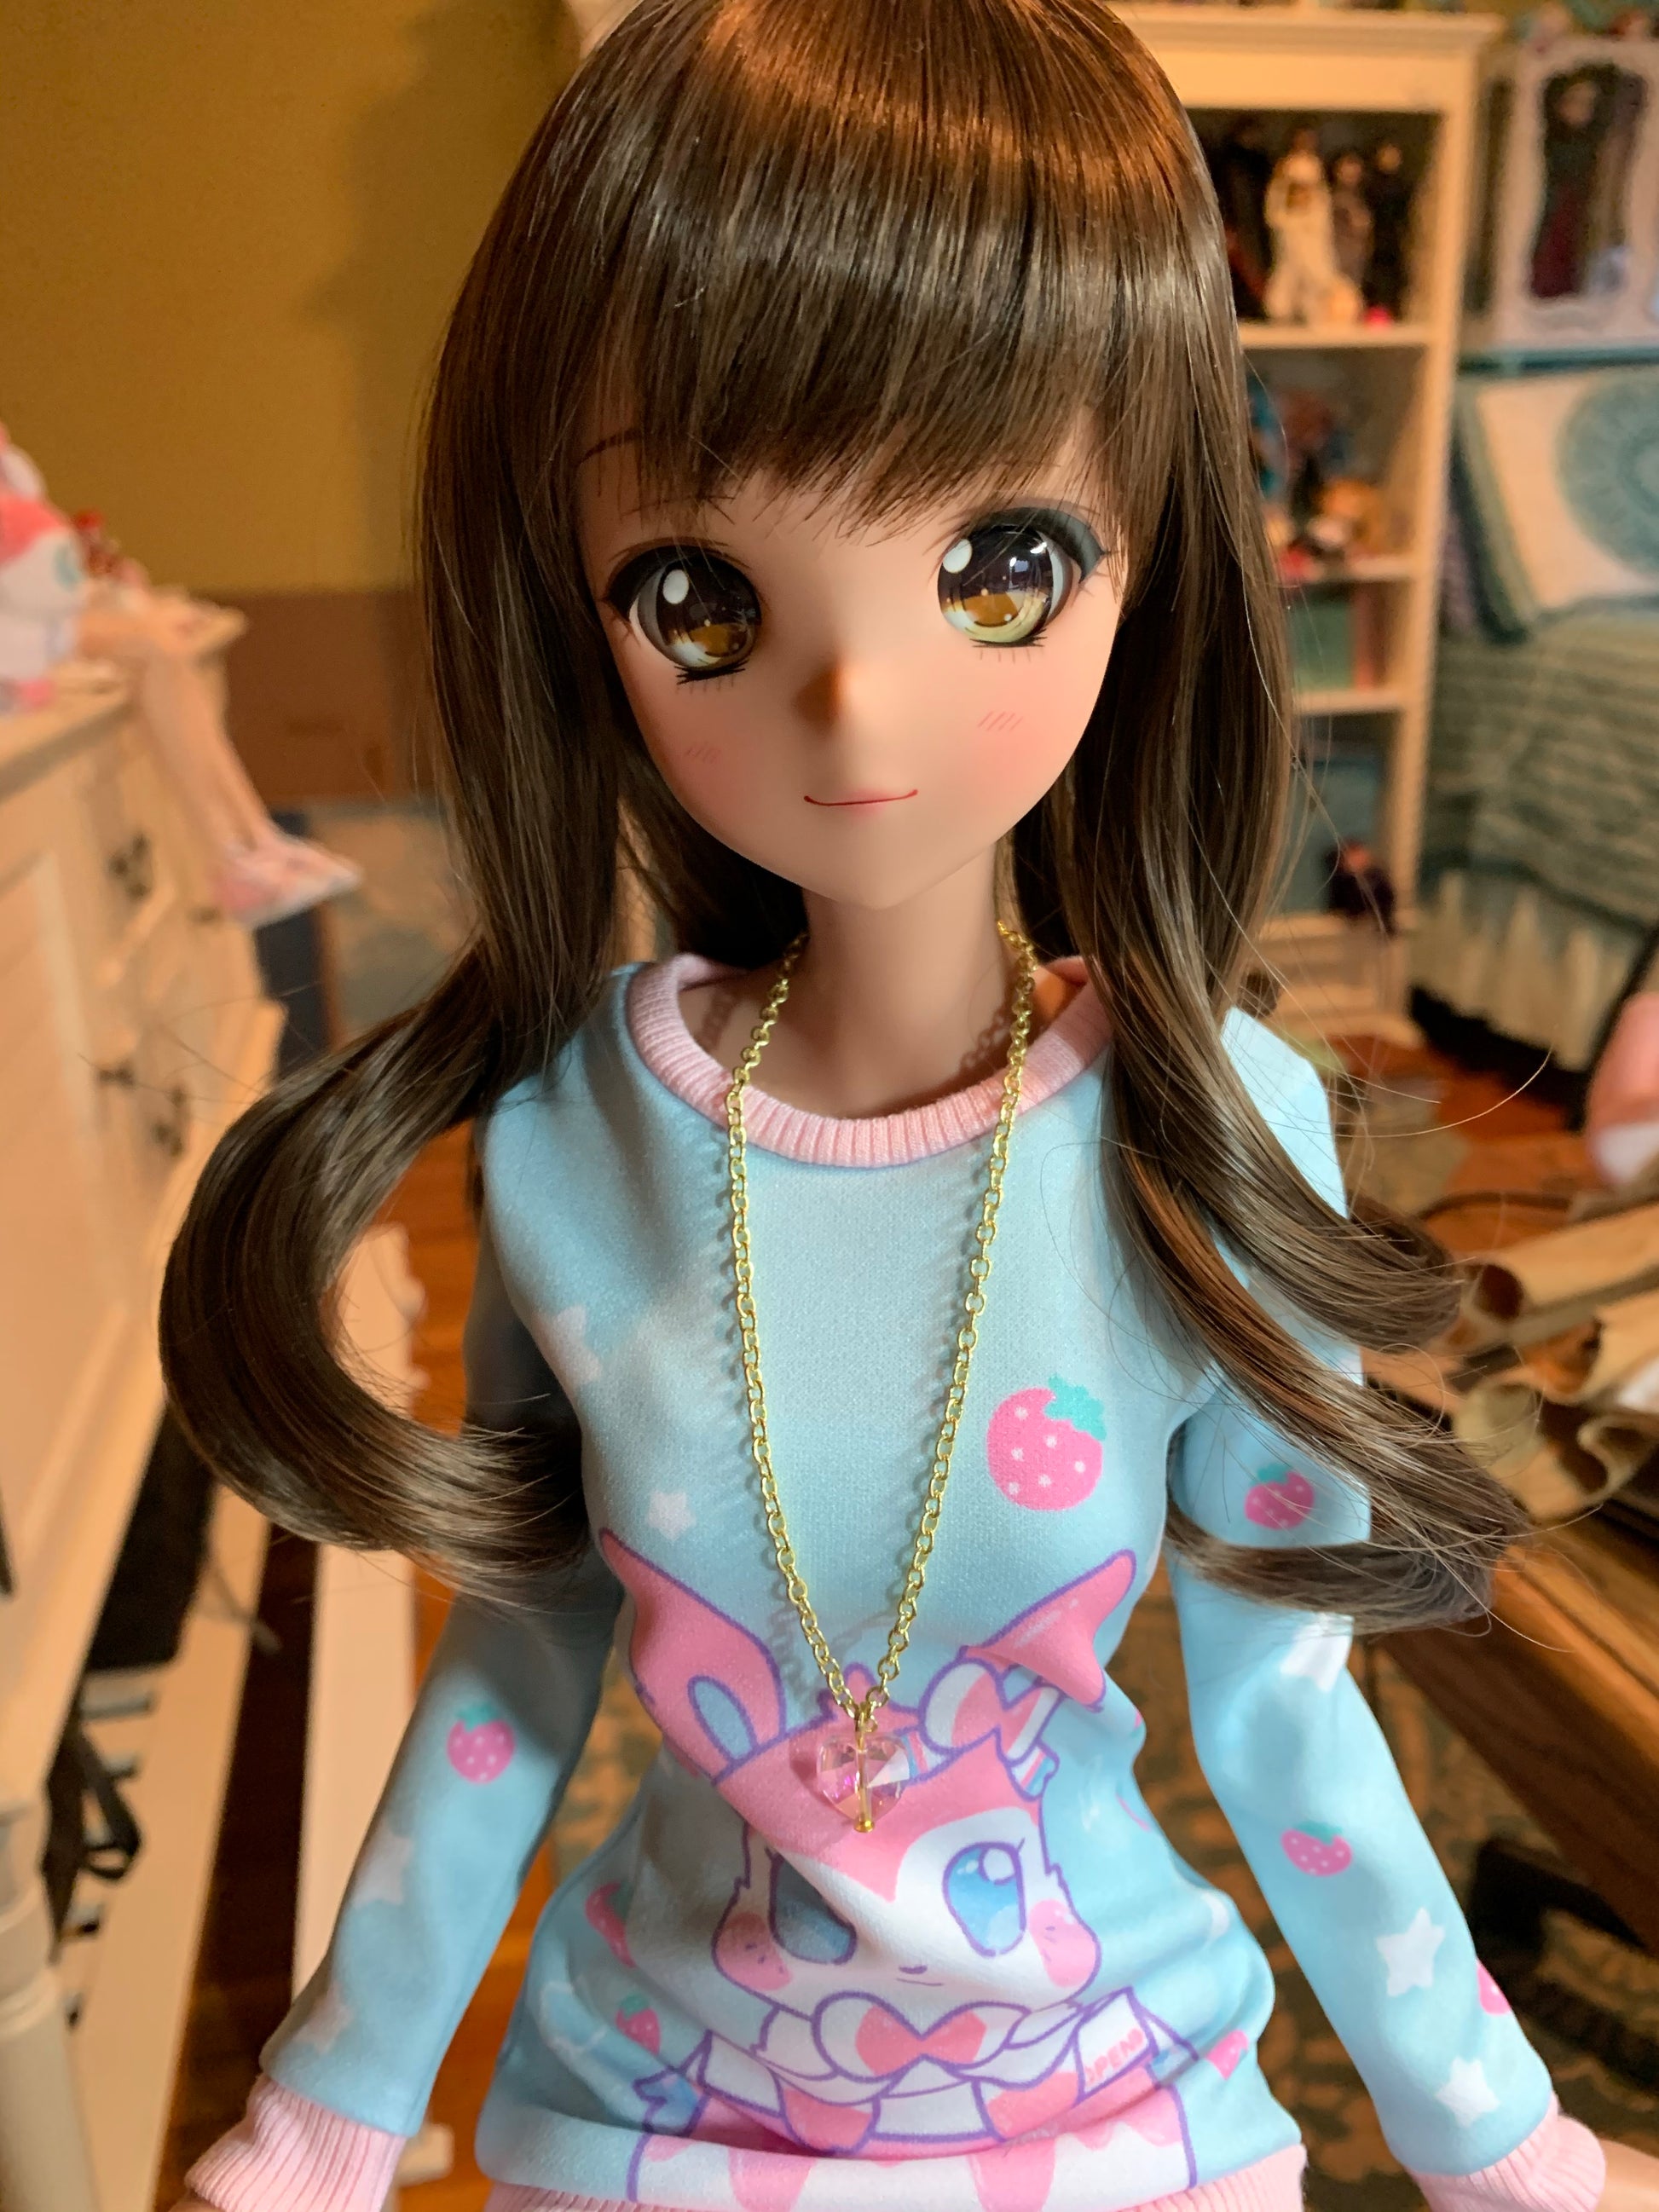 Doll Fairy Signature Crystal Heart Necklace for Smart Dolls/ SD size BJD - The Doll Fairy